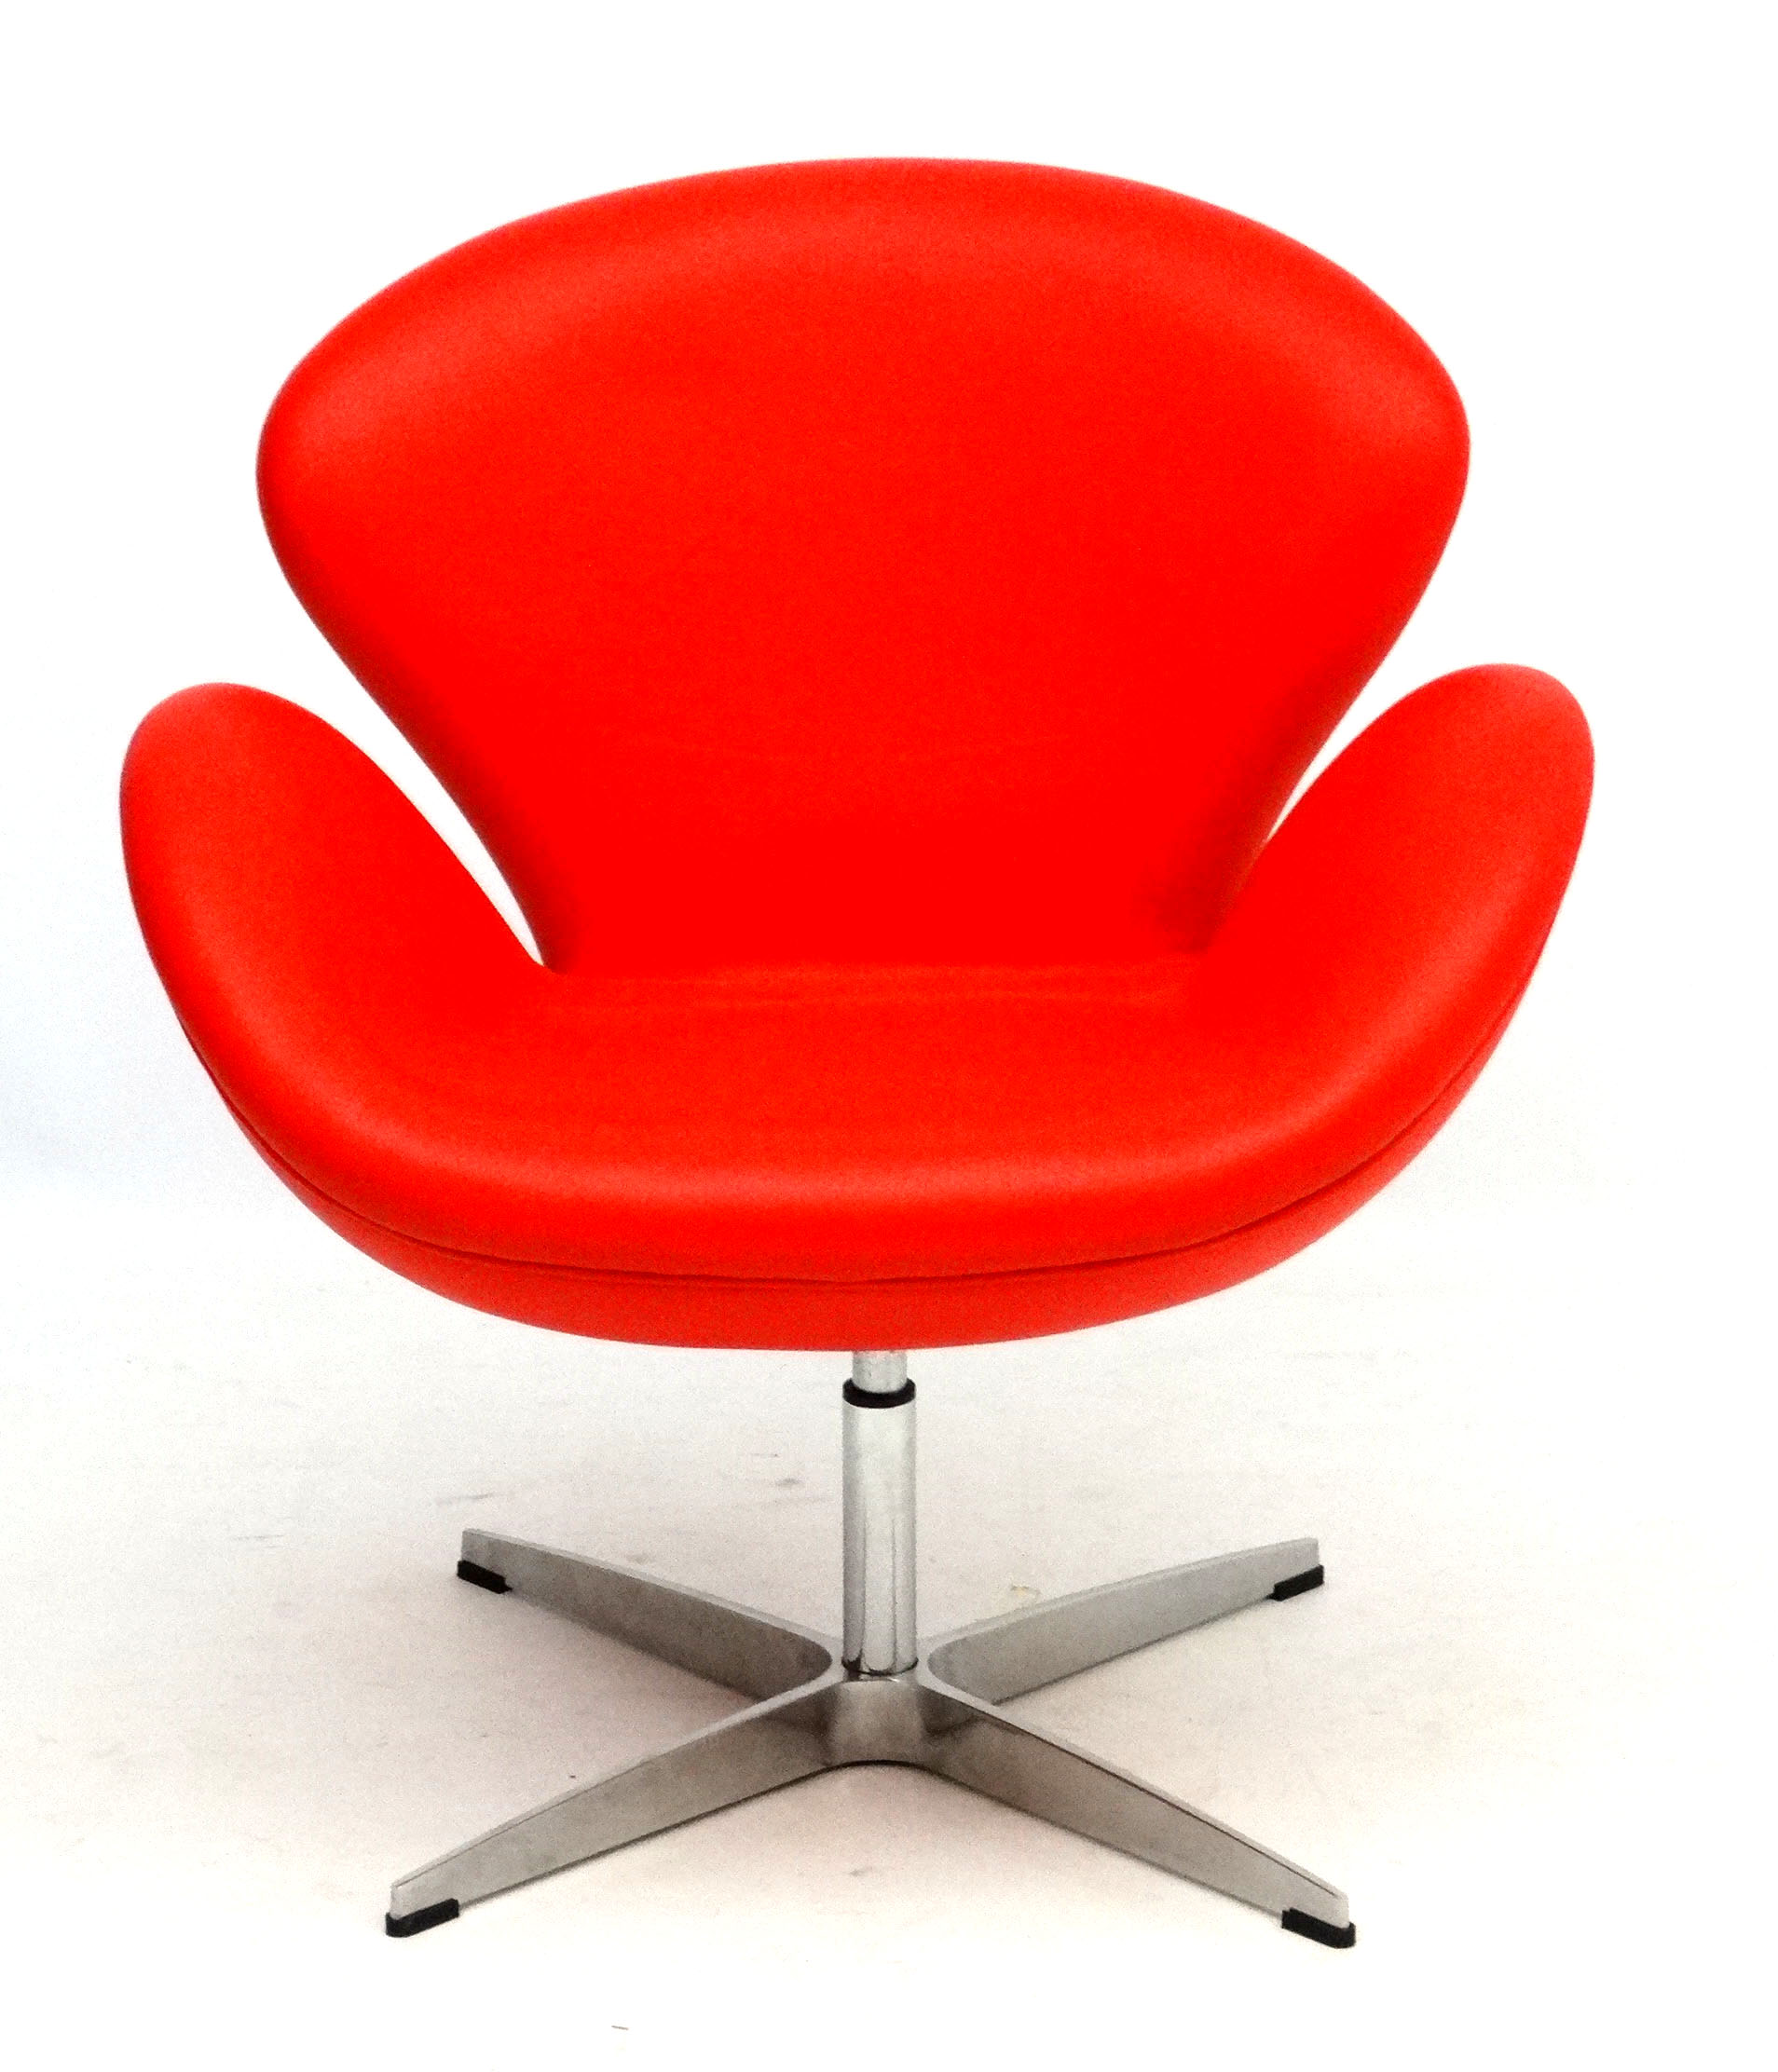 Fritz Hanson Arne Jacobson Swan Chair Sold For £400